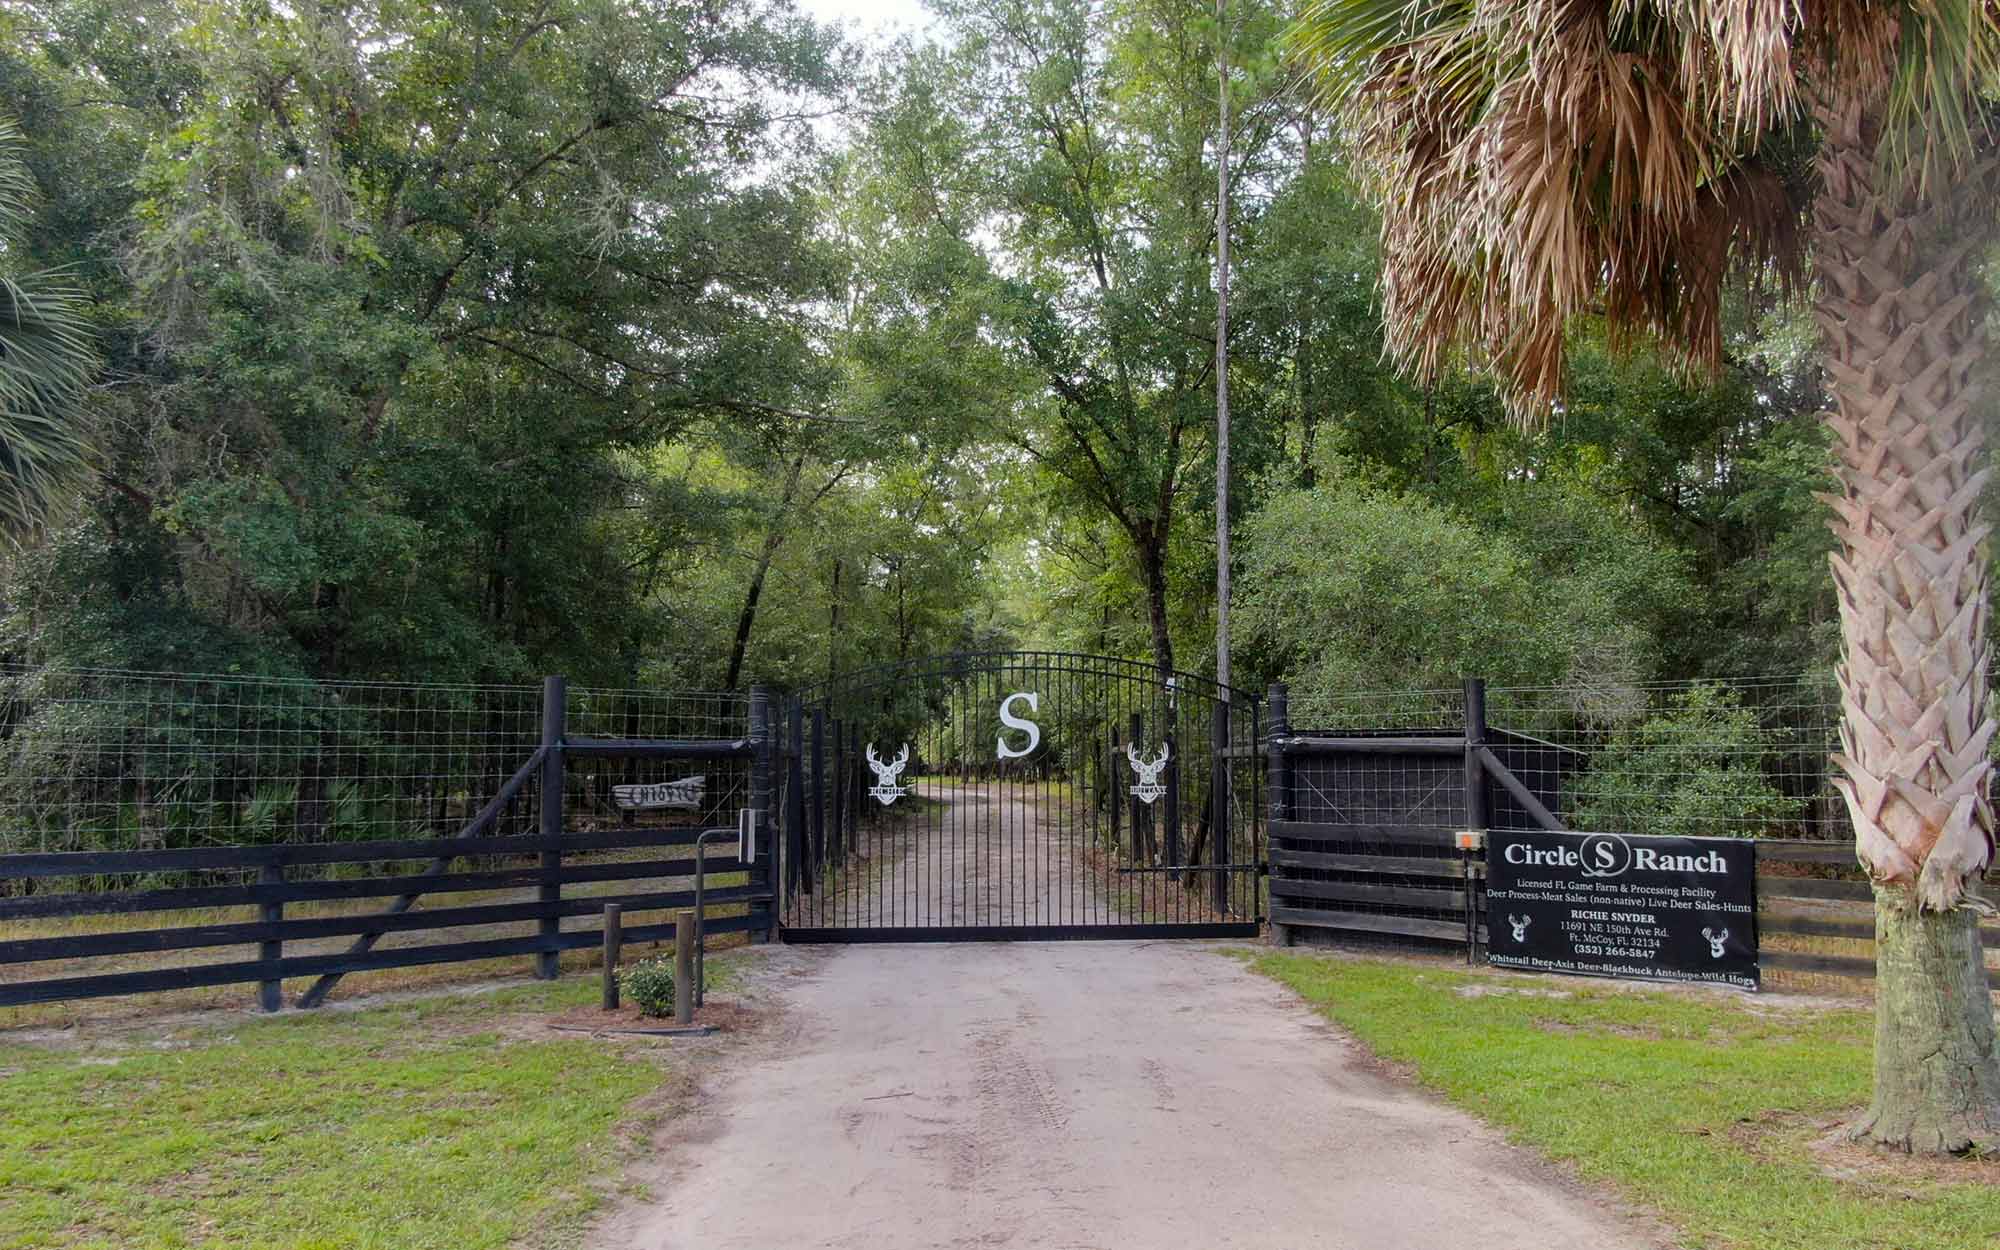 The electronic gate at Circle S Ranch